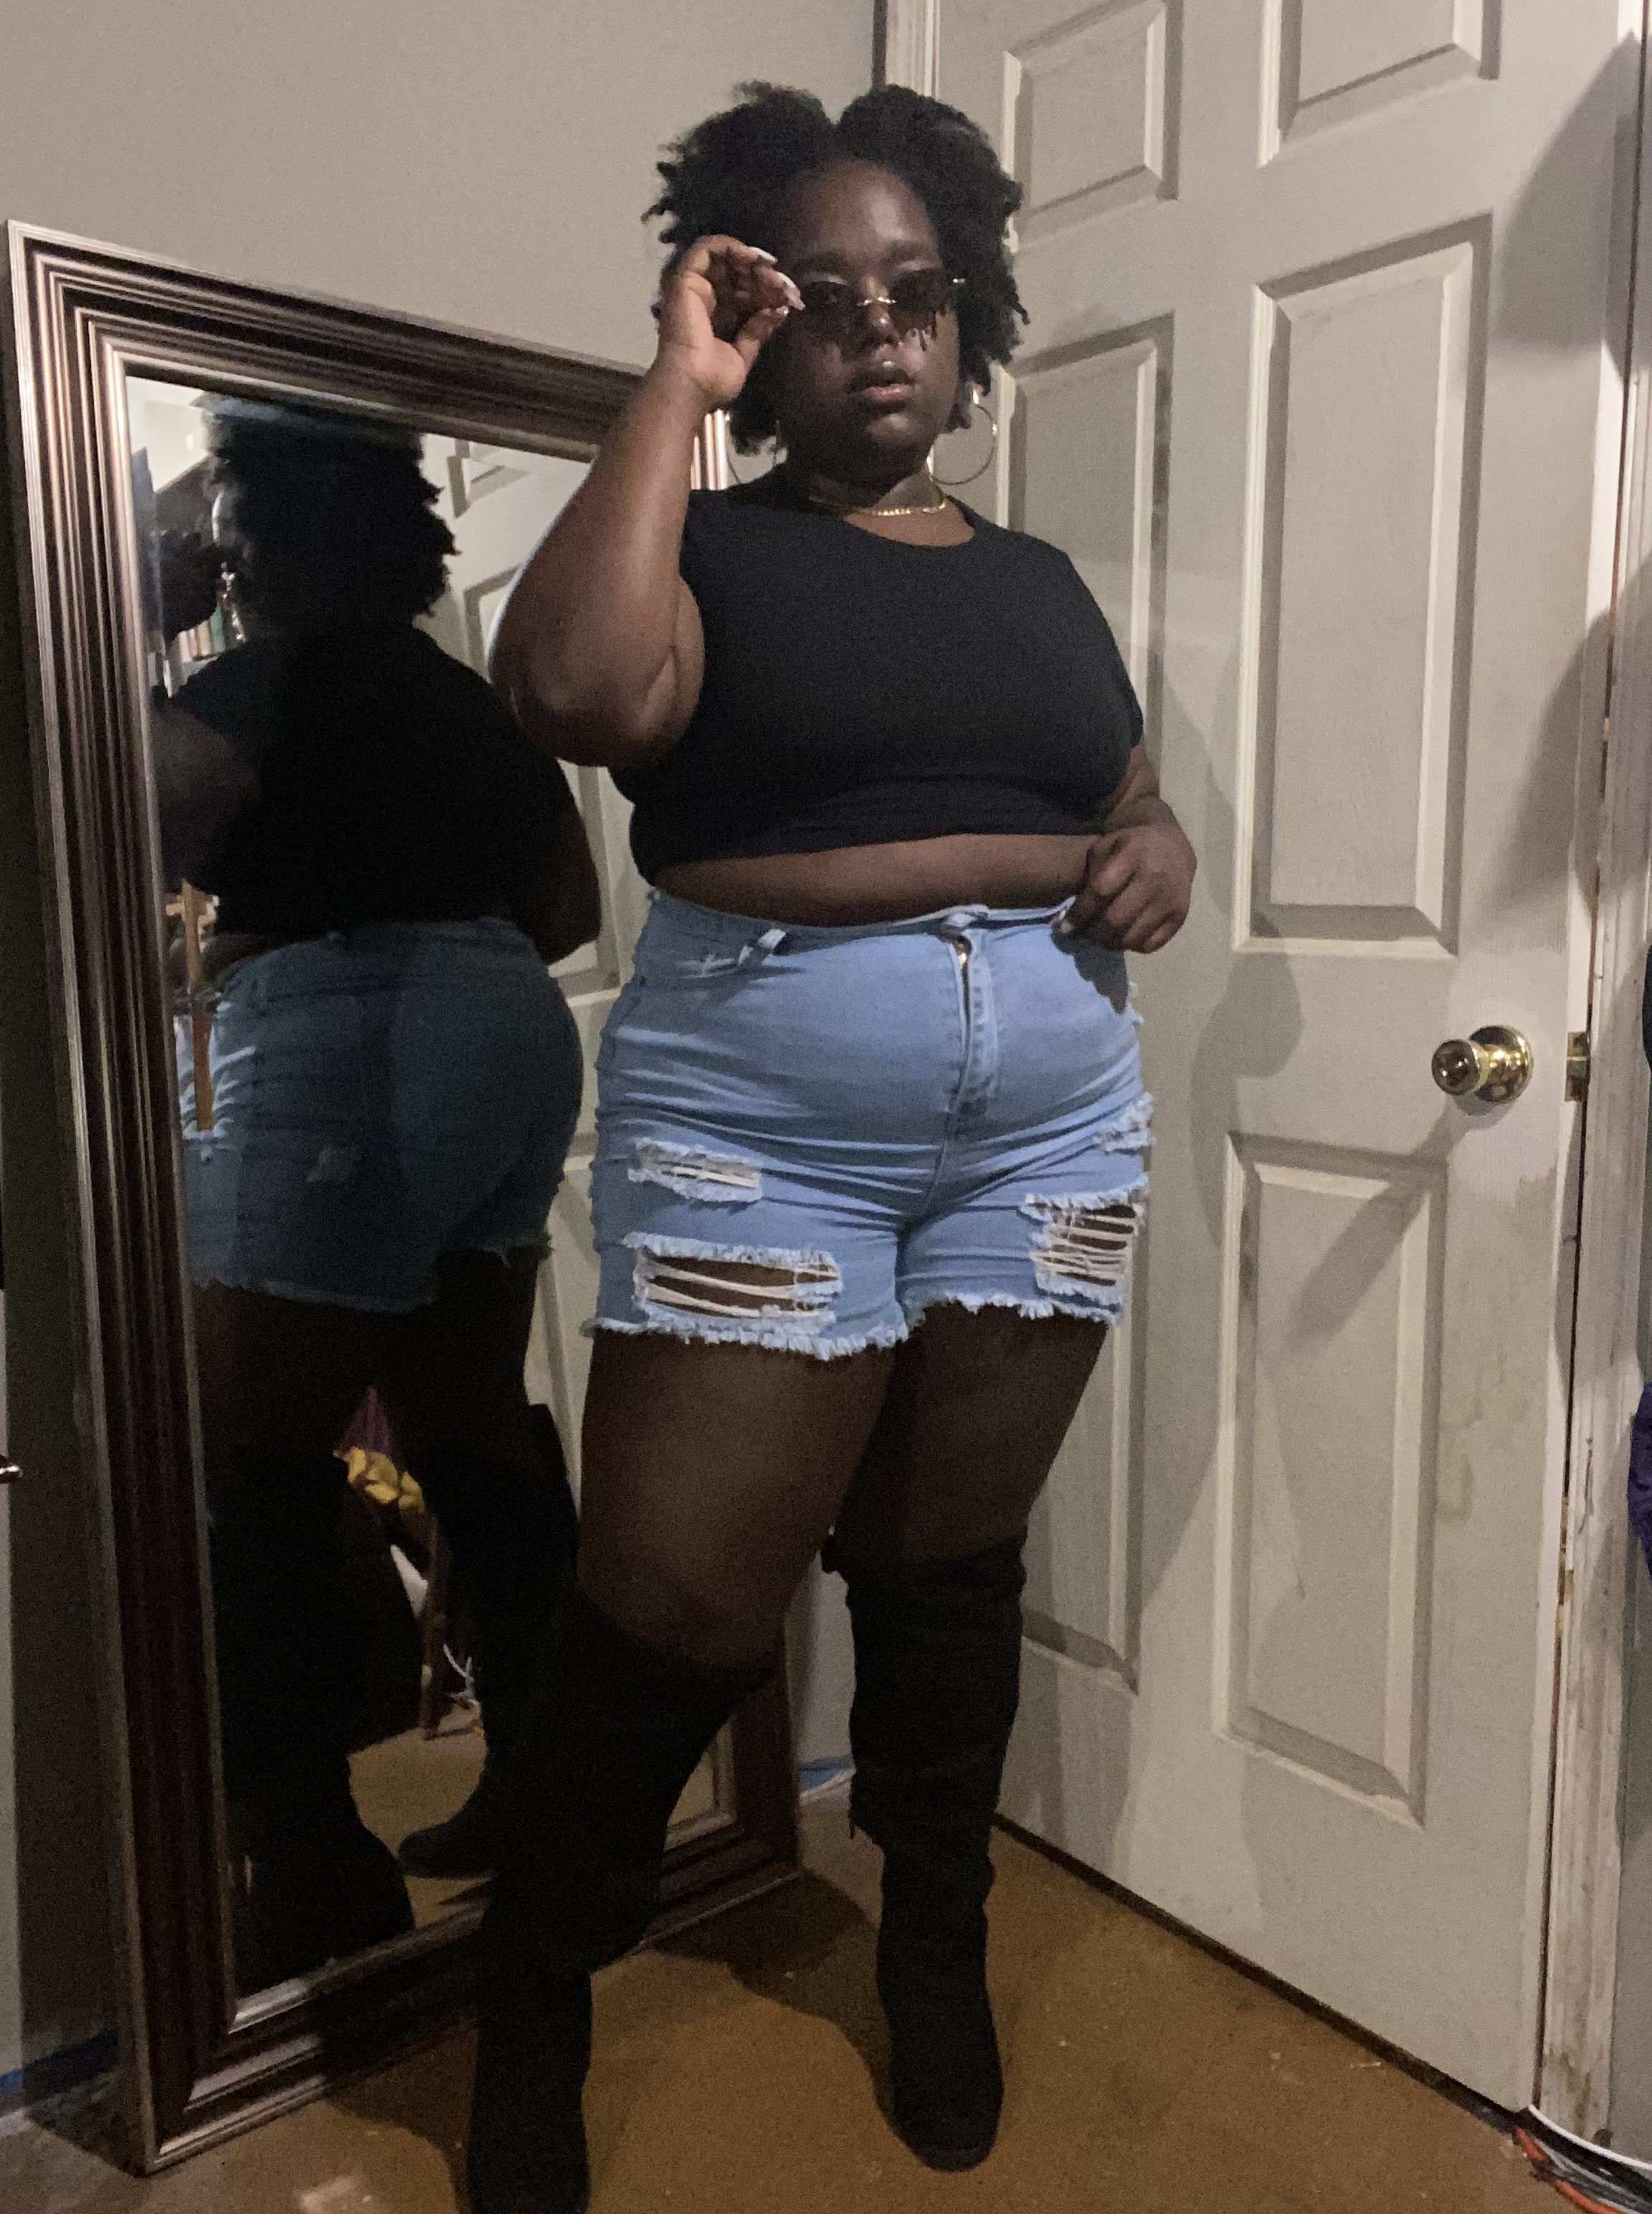 Transitioning – Styles of a Curvy Girl